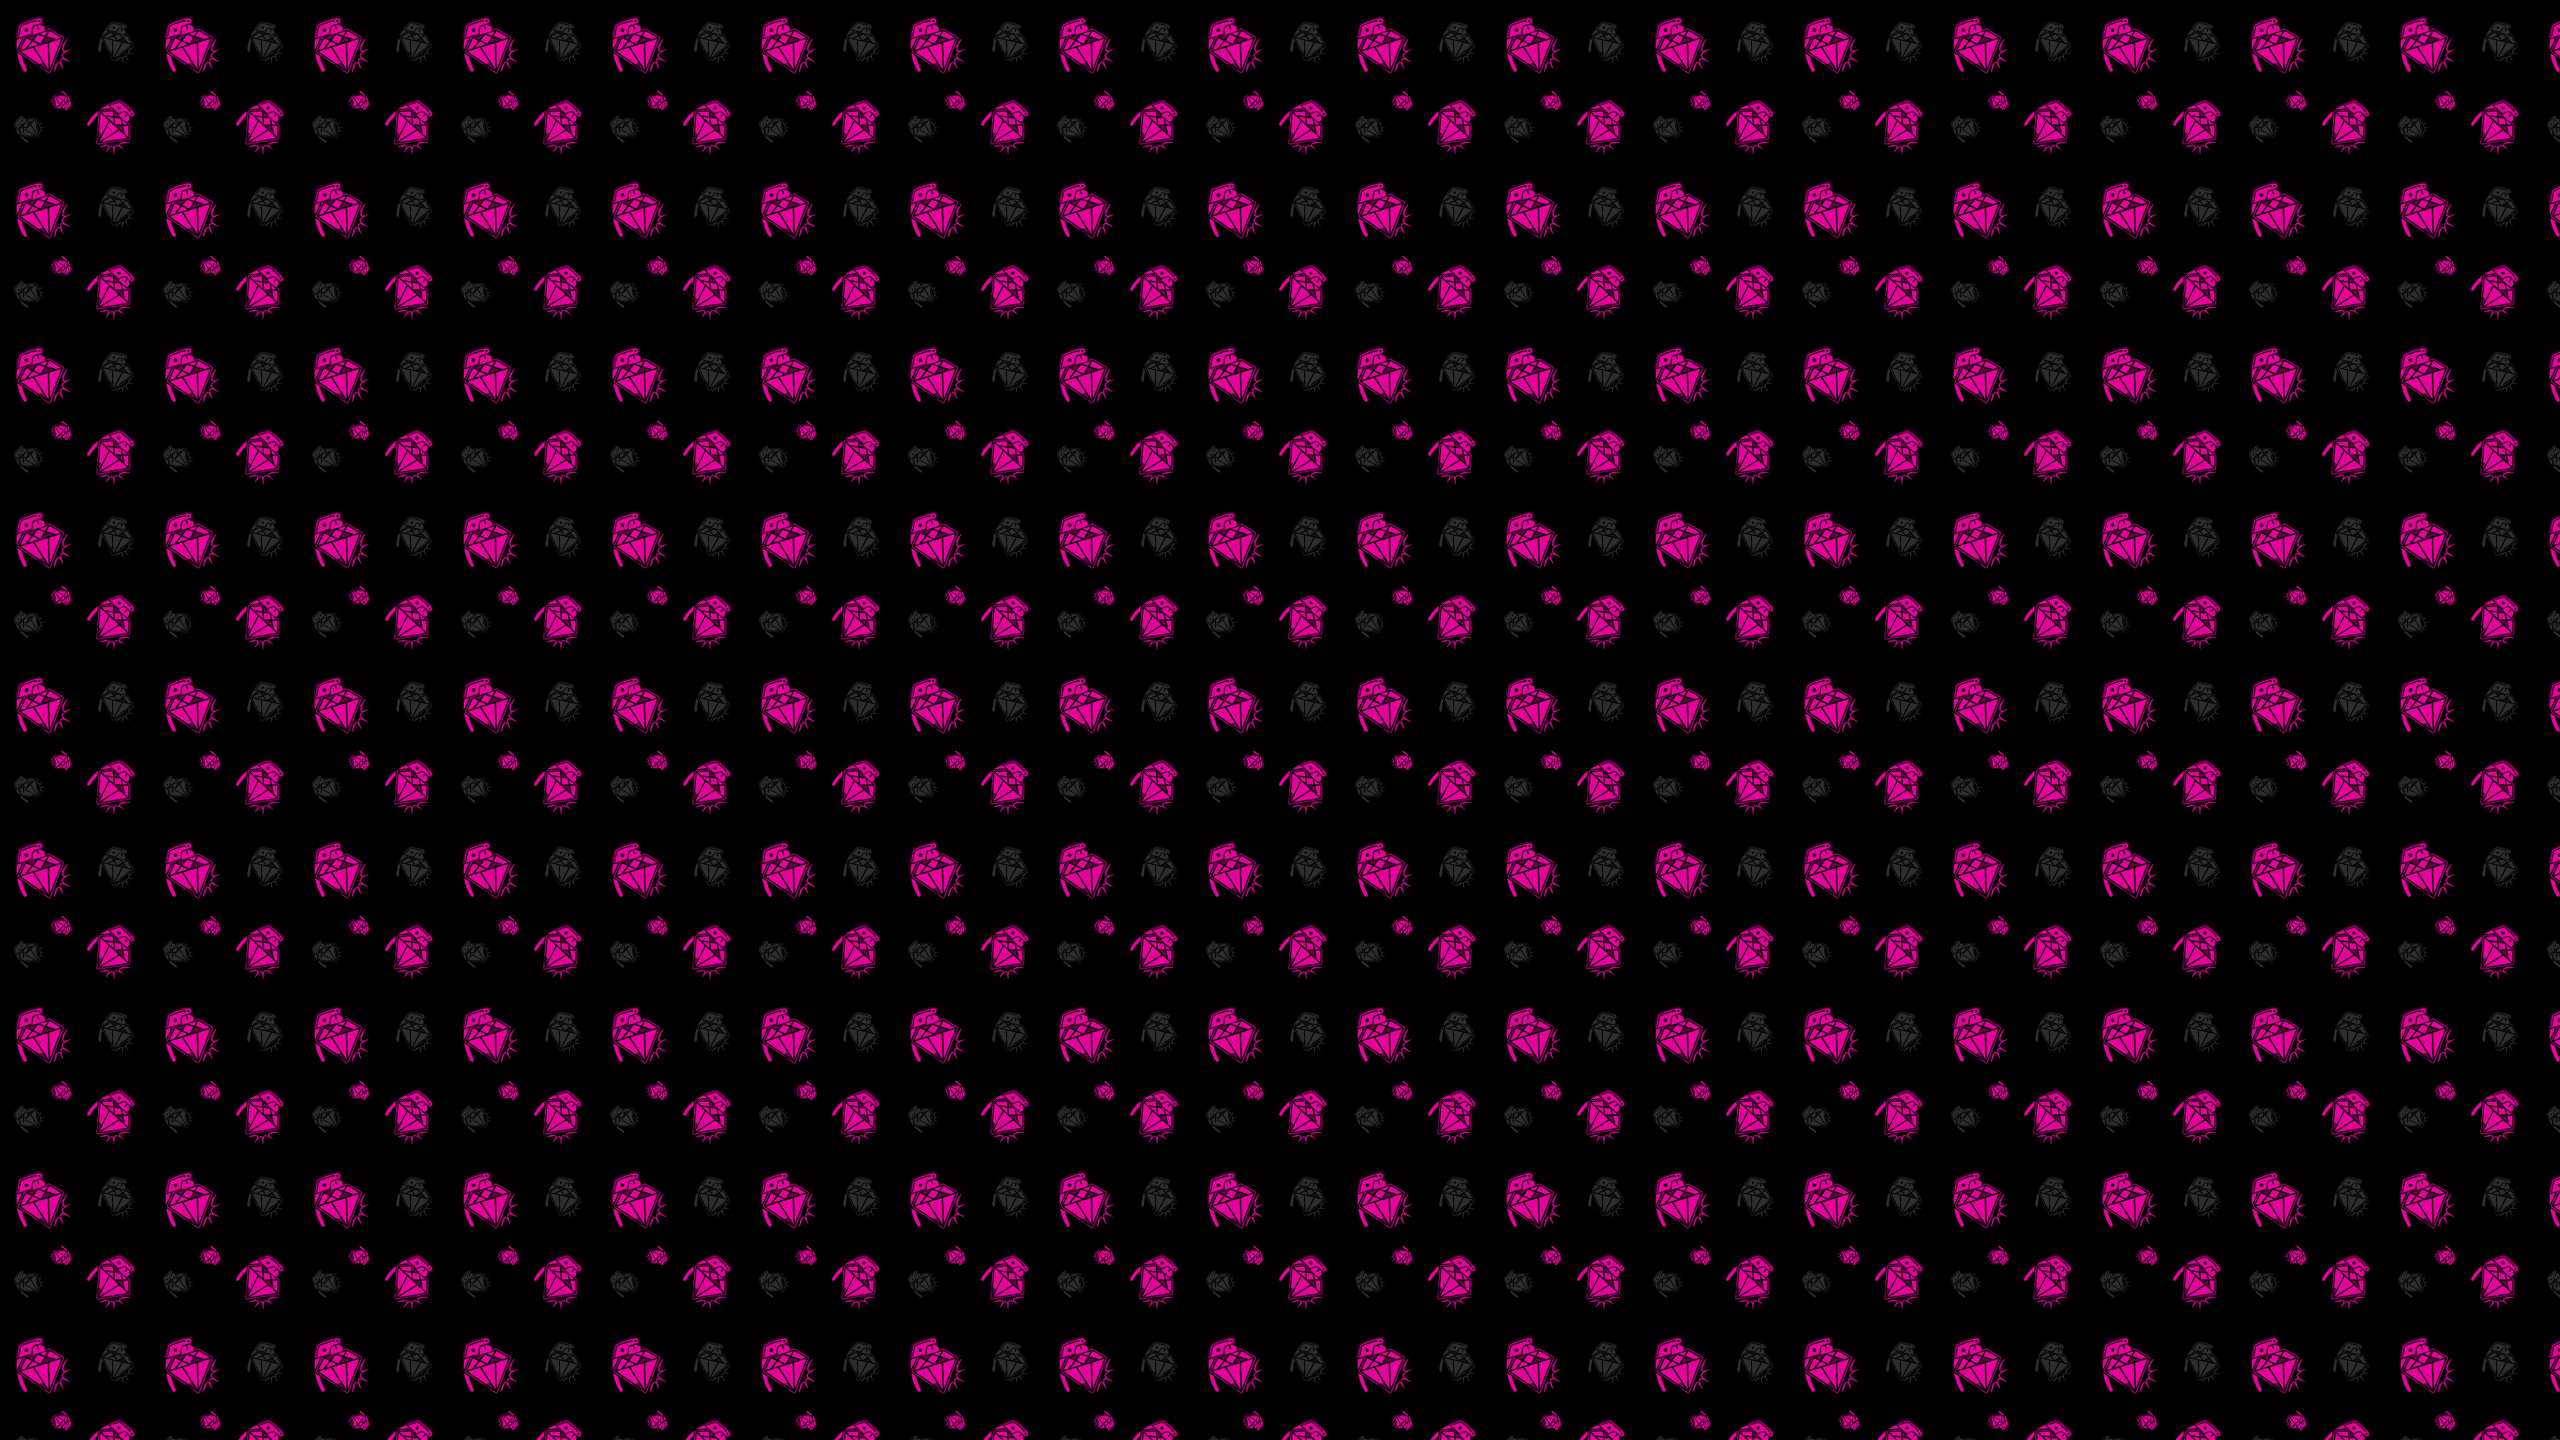 A black background with pink dots - Diamond